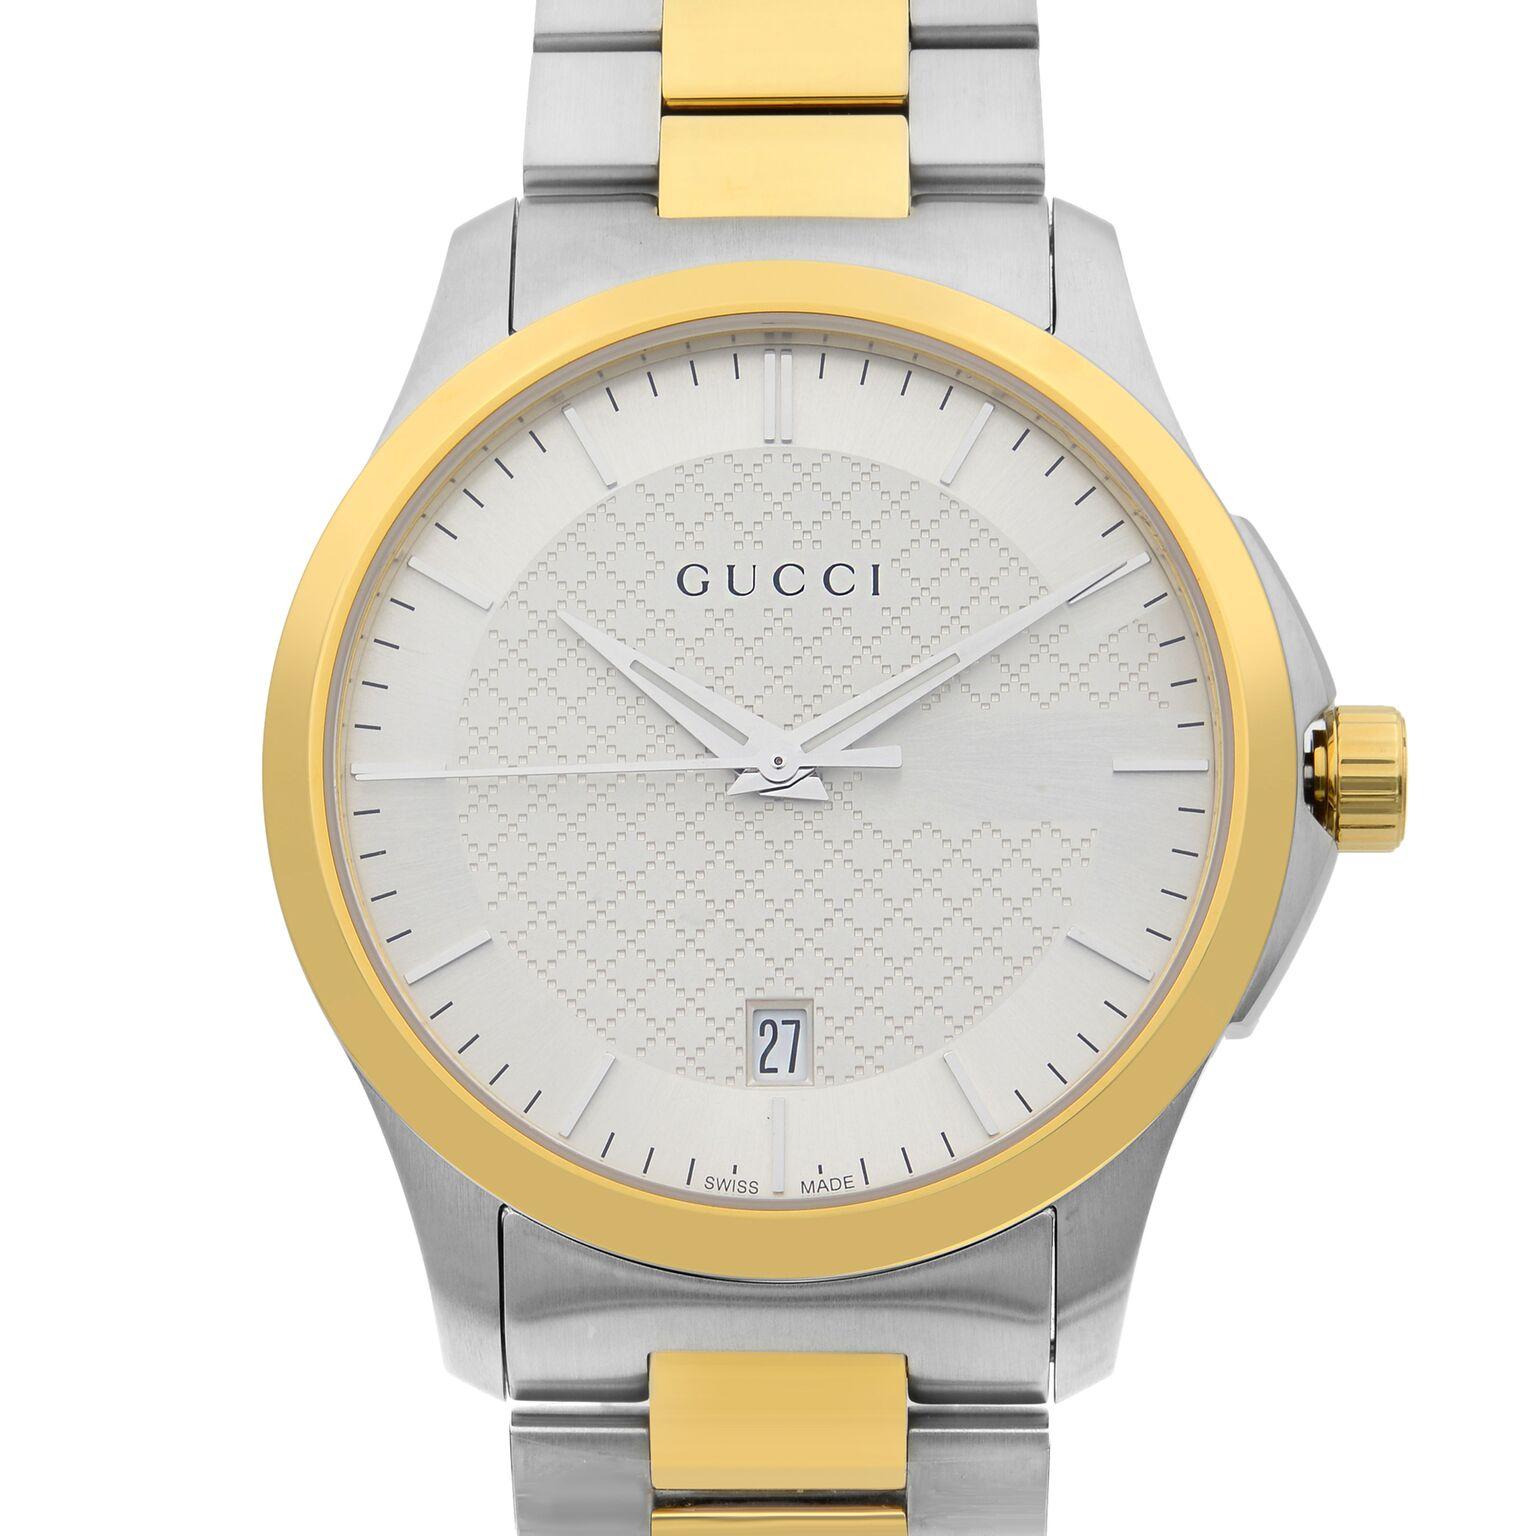 Pre-owned Gucci G-Timeless Two-Tone Stainless Steel Silver Dial Quartz Men's Watch YA126450. The Watch Has Tiny Scratches on Gold Tone Links. It Fits a 6.25-inch Wrist. This Beautiful Timepiece Features: Stainless Steel Case with a Stainless Steel